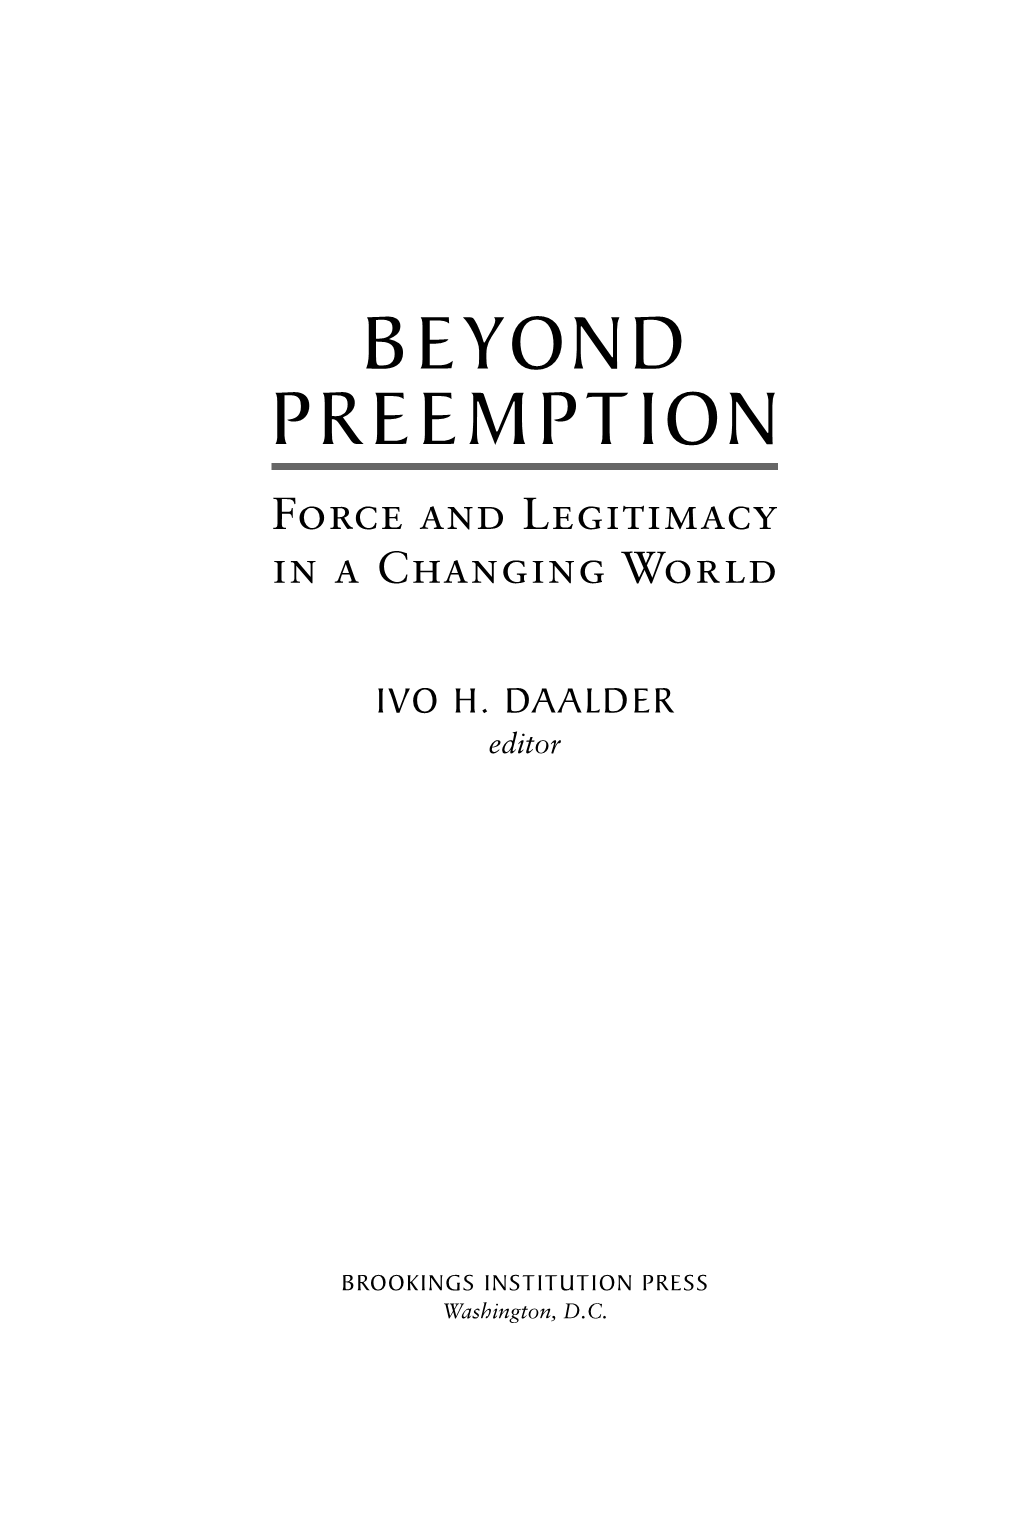 BEYOND PREEMPTION Force and Legitimacy in a Changing World